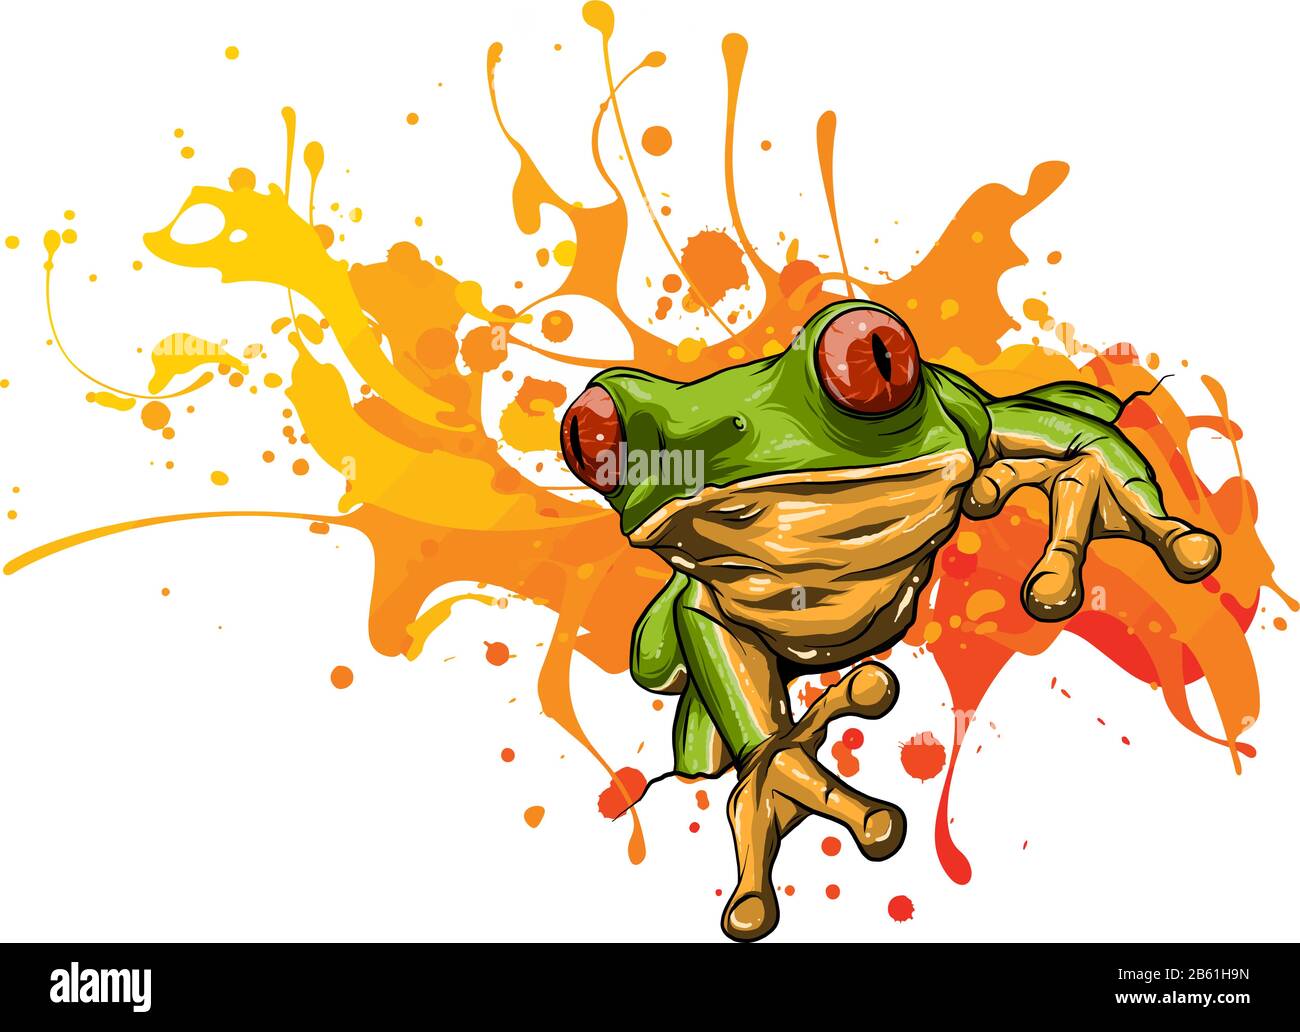 Little frog. Vector illustration of a cute little frog. Stock Vector